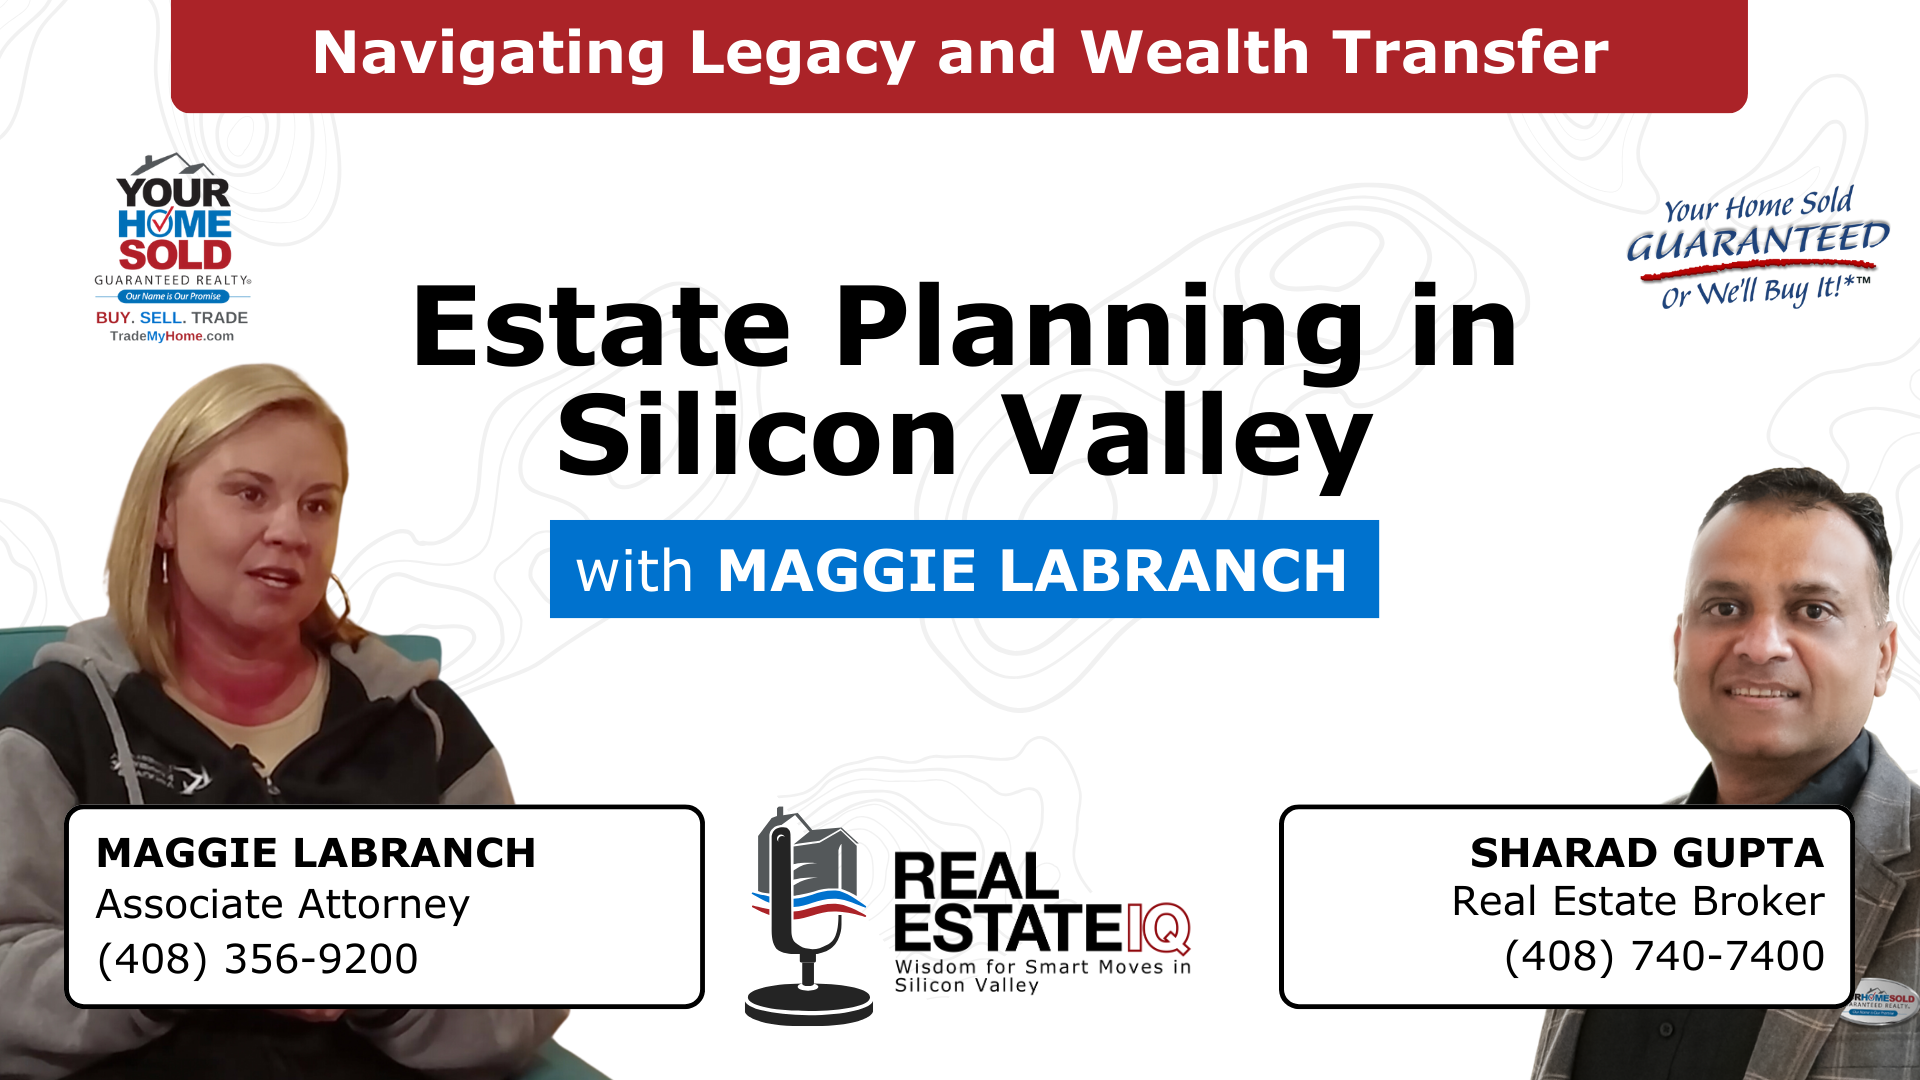 Estate Planning: Navigating Legacy and Wealth Transfer in Silicon Valley